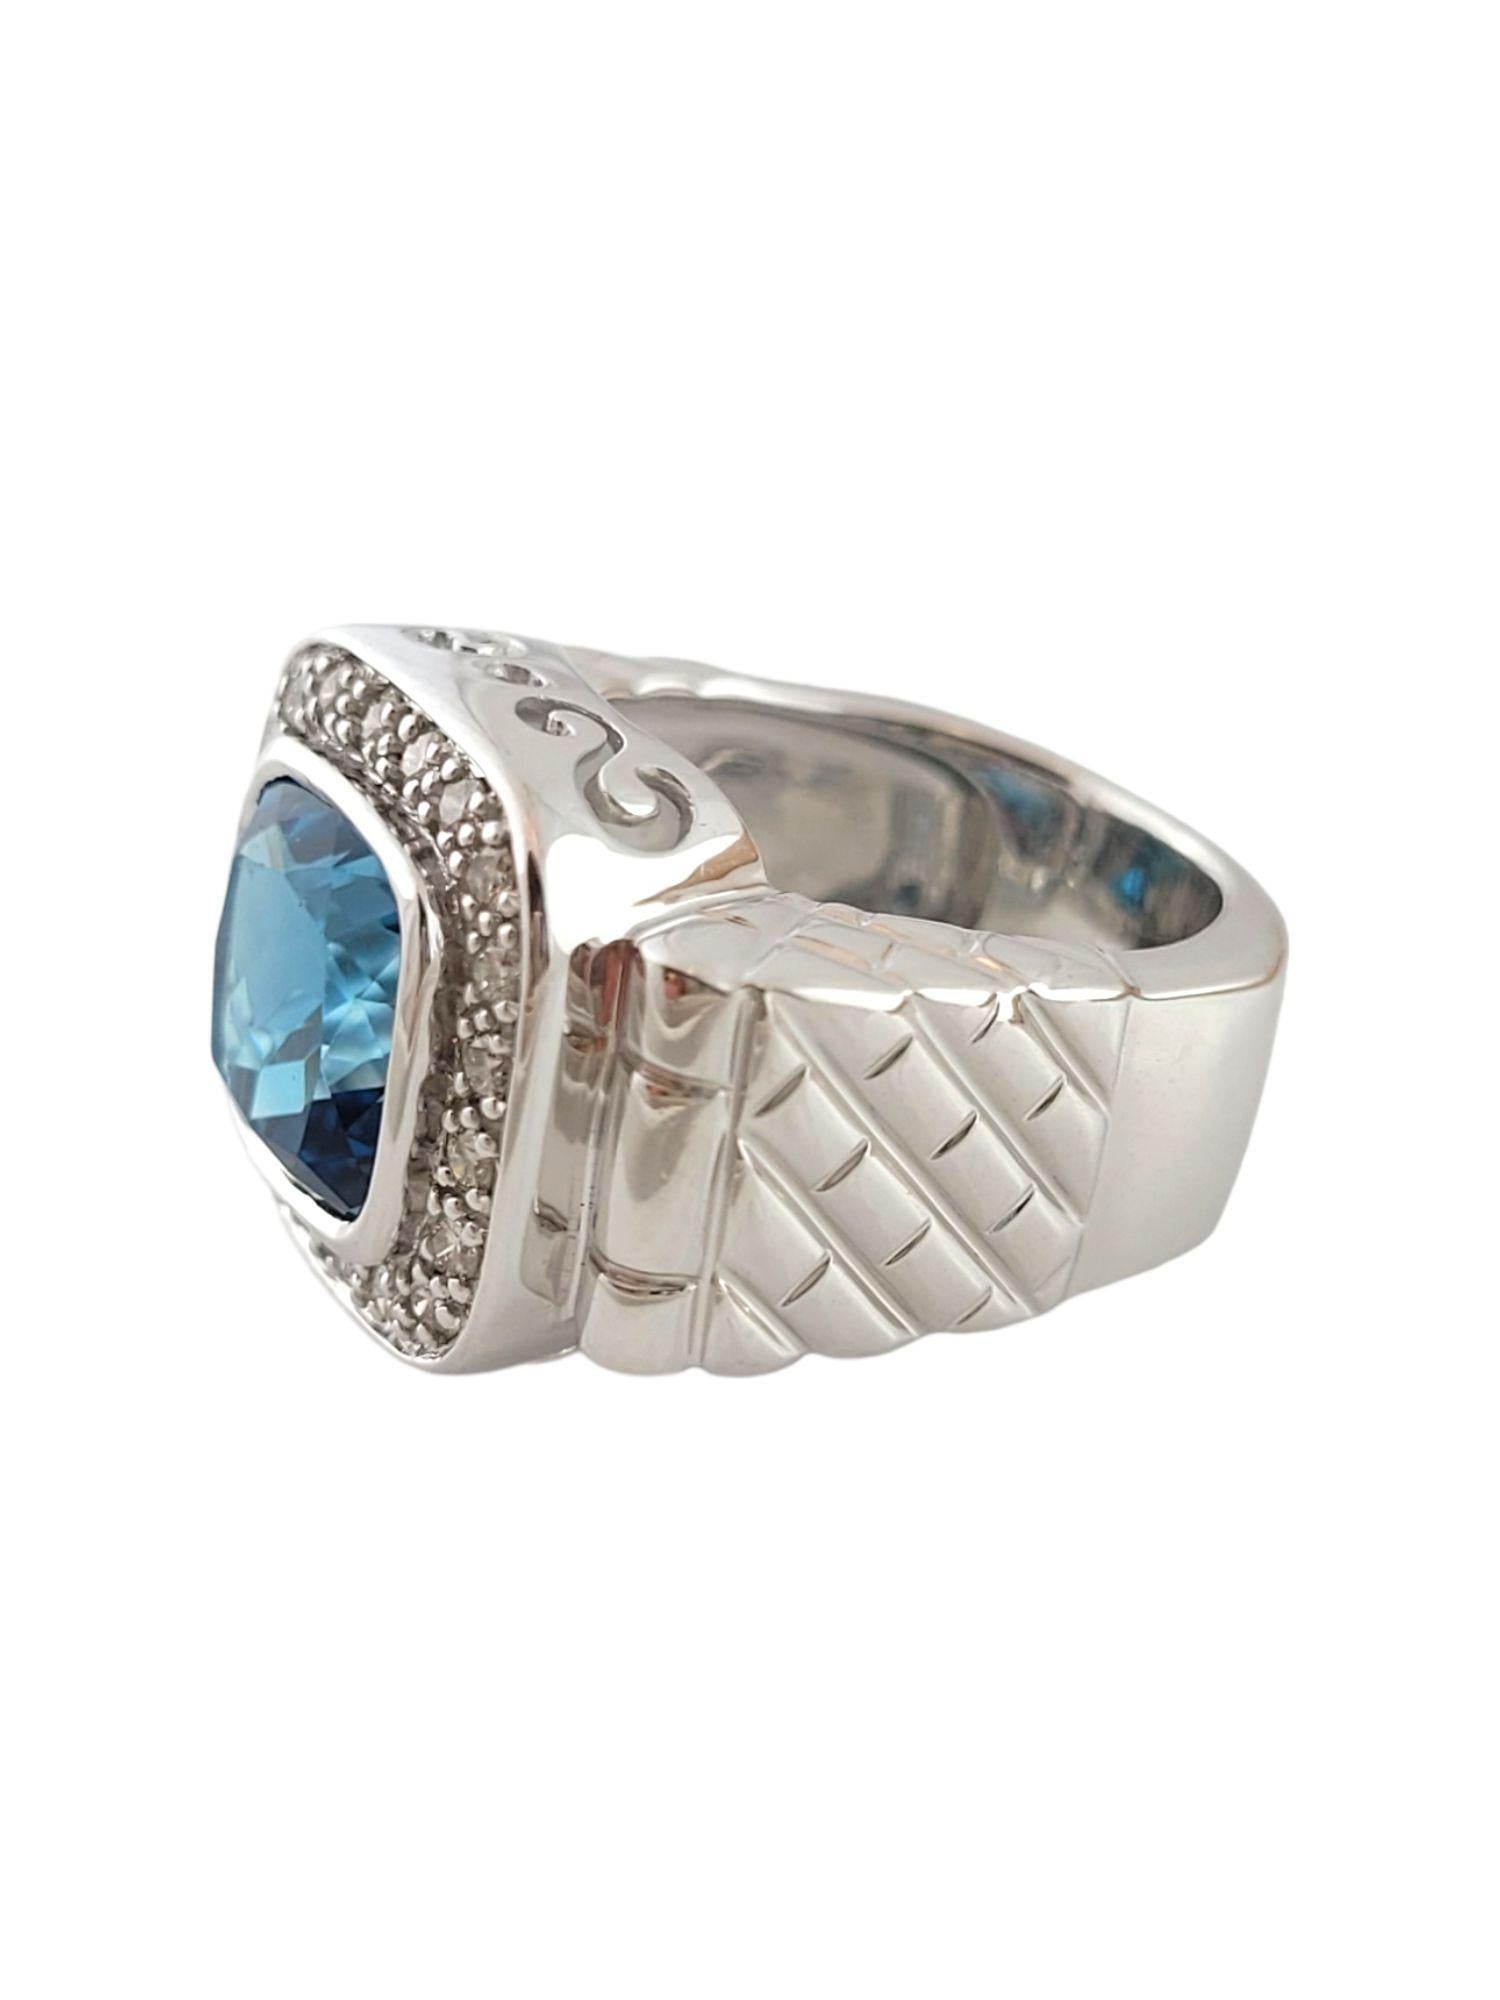 This gorgeous 14K gold cocktail ring features a beautiful, square cut blue topaz stone surrounded by 21 round cut, sparkling diamonds!

Approximate total diamond weight: .31 cttw

Diamond clarity: SI1-I1

Diamond color: J-K

5.88ct blue topaz. Eye